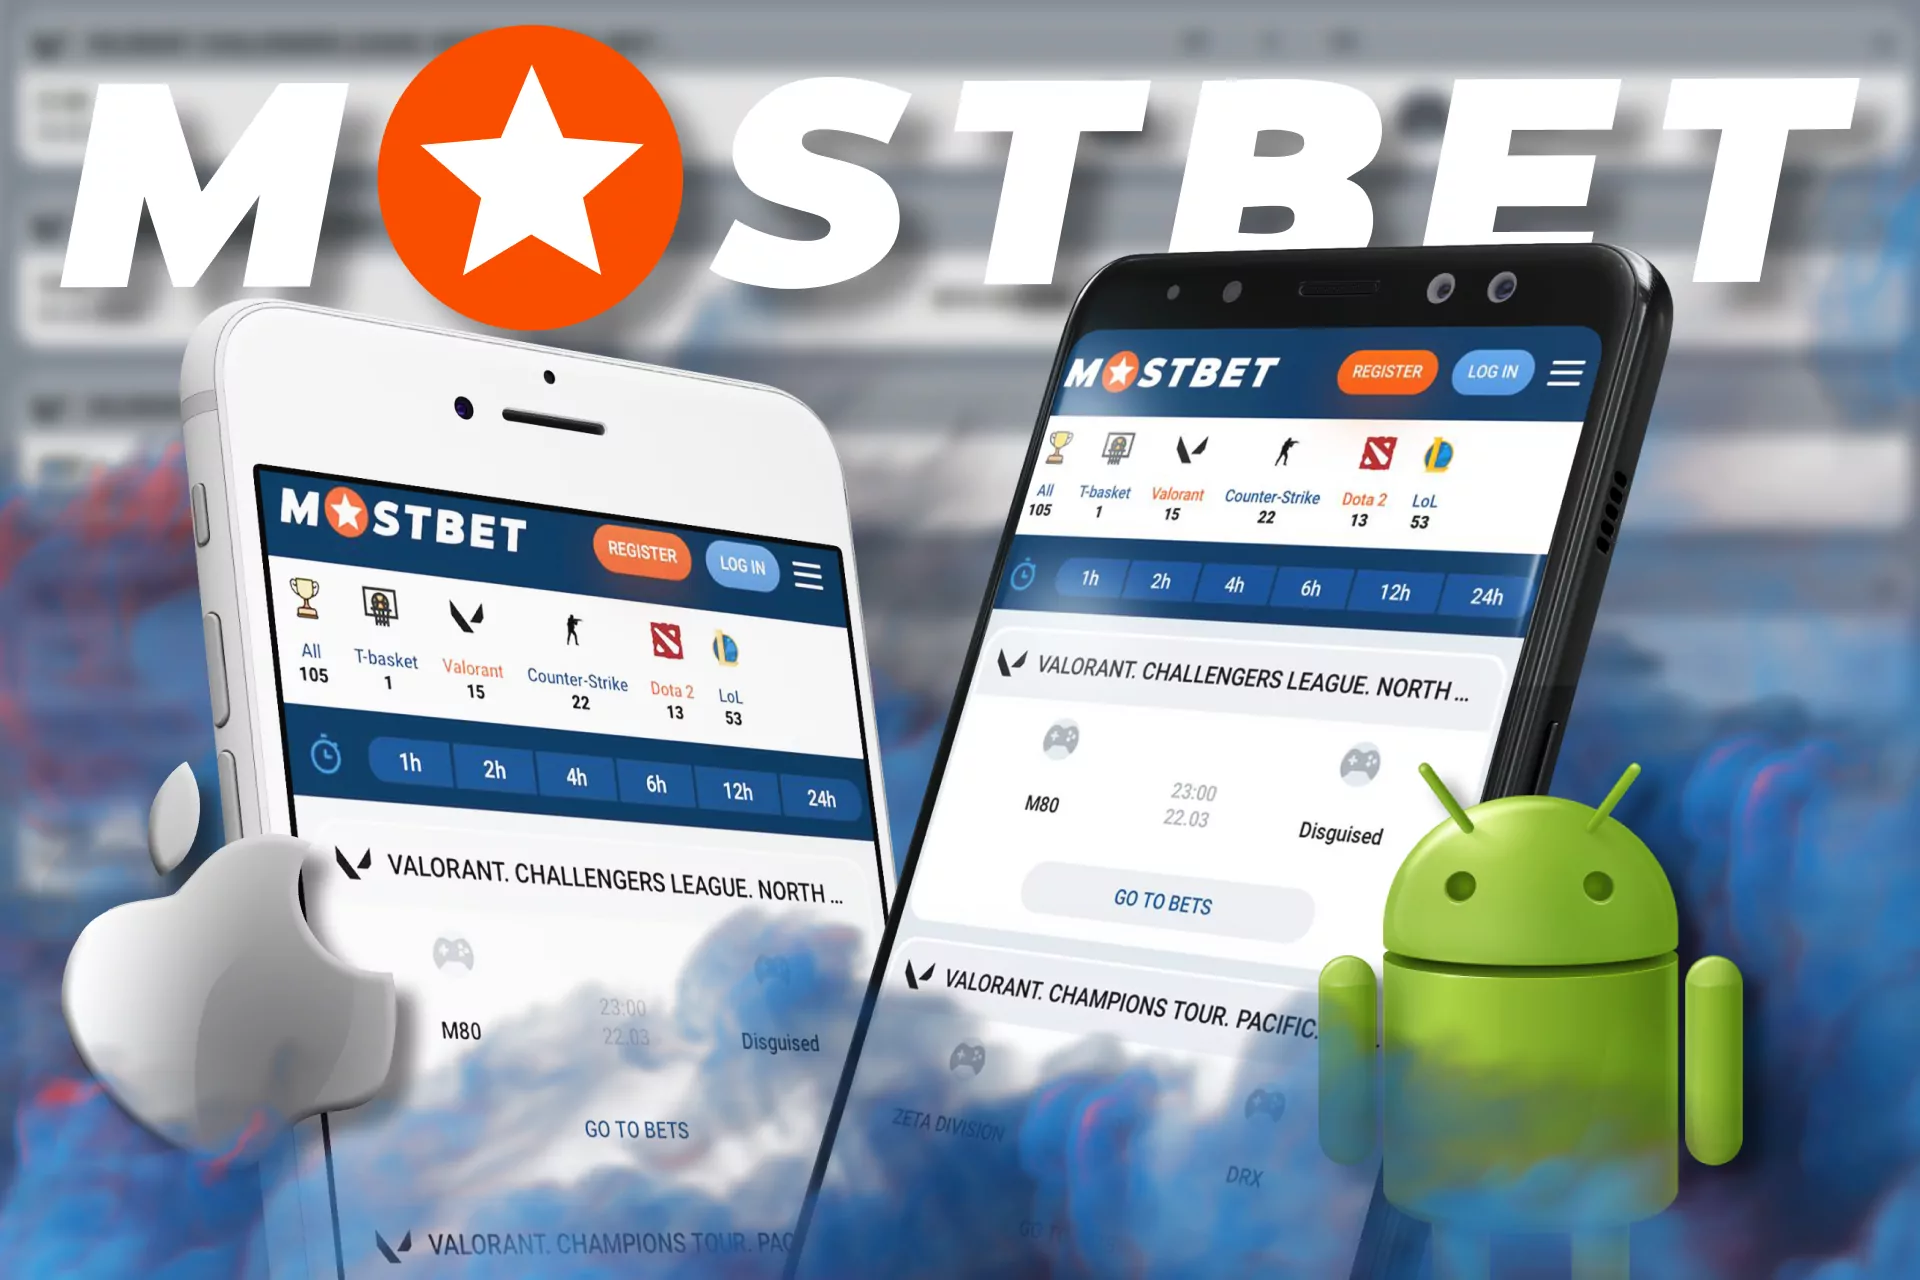 At Mostbet, bet on Valorant directly from your phone using the app.